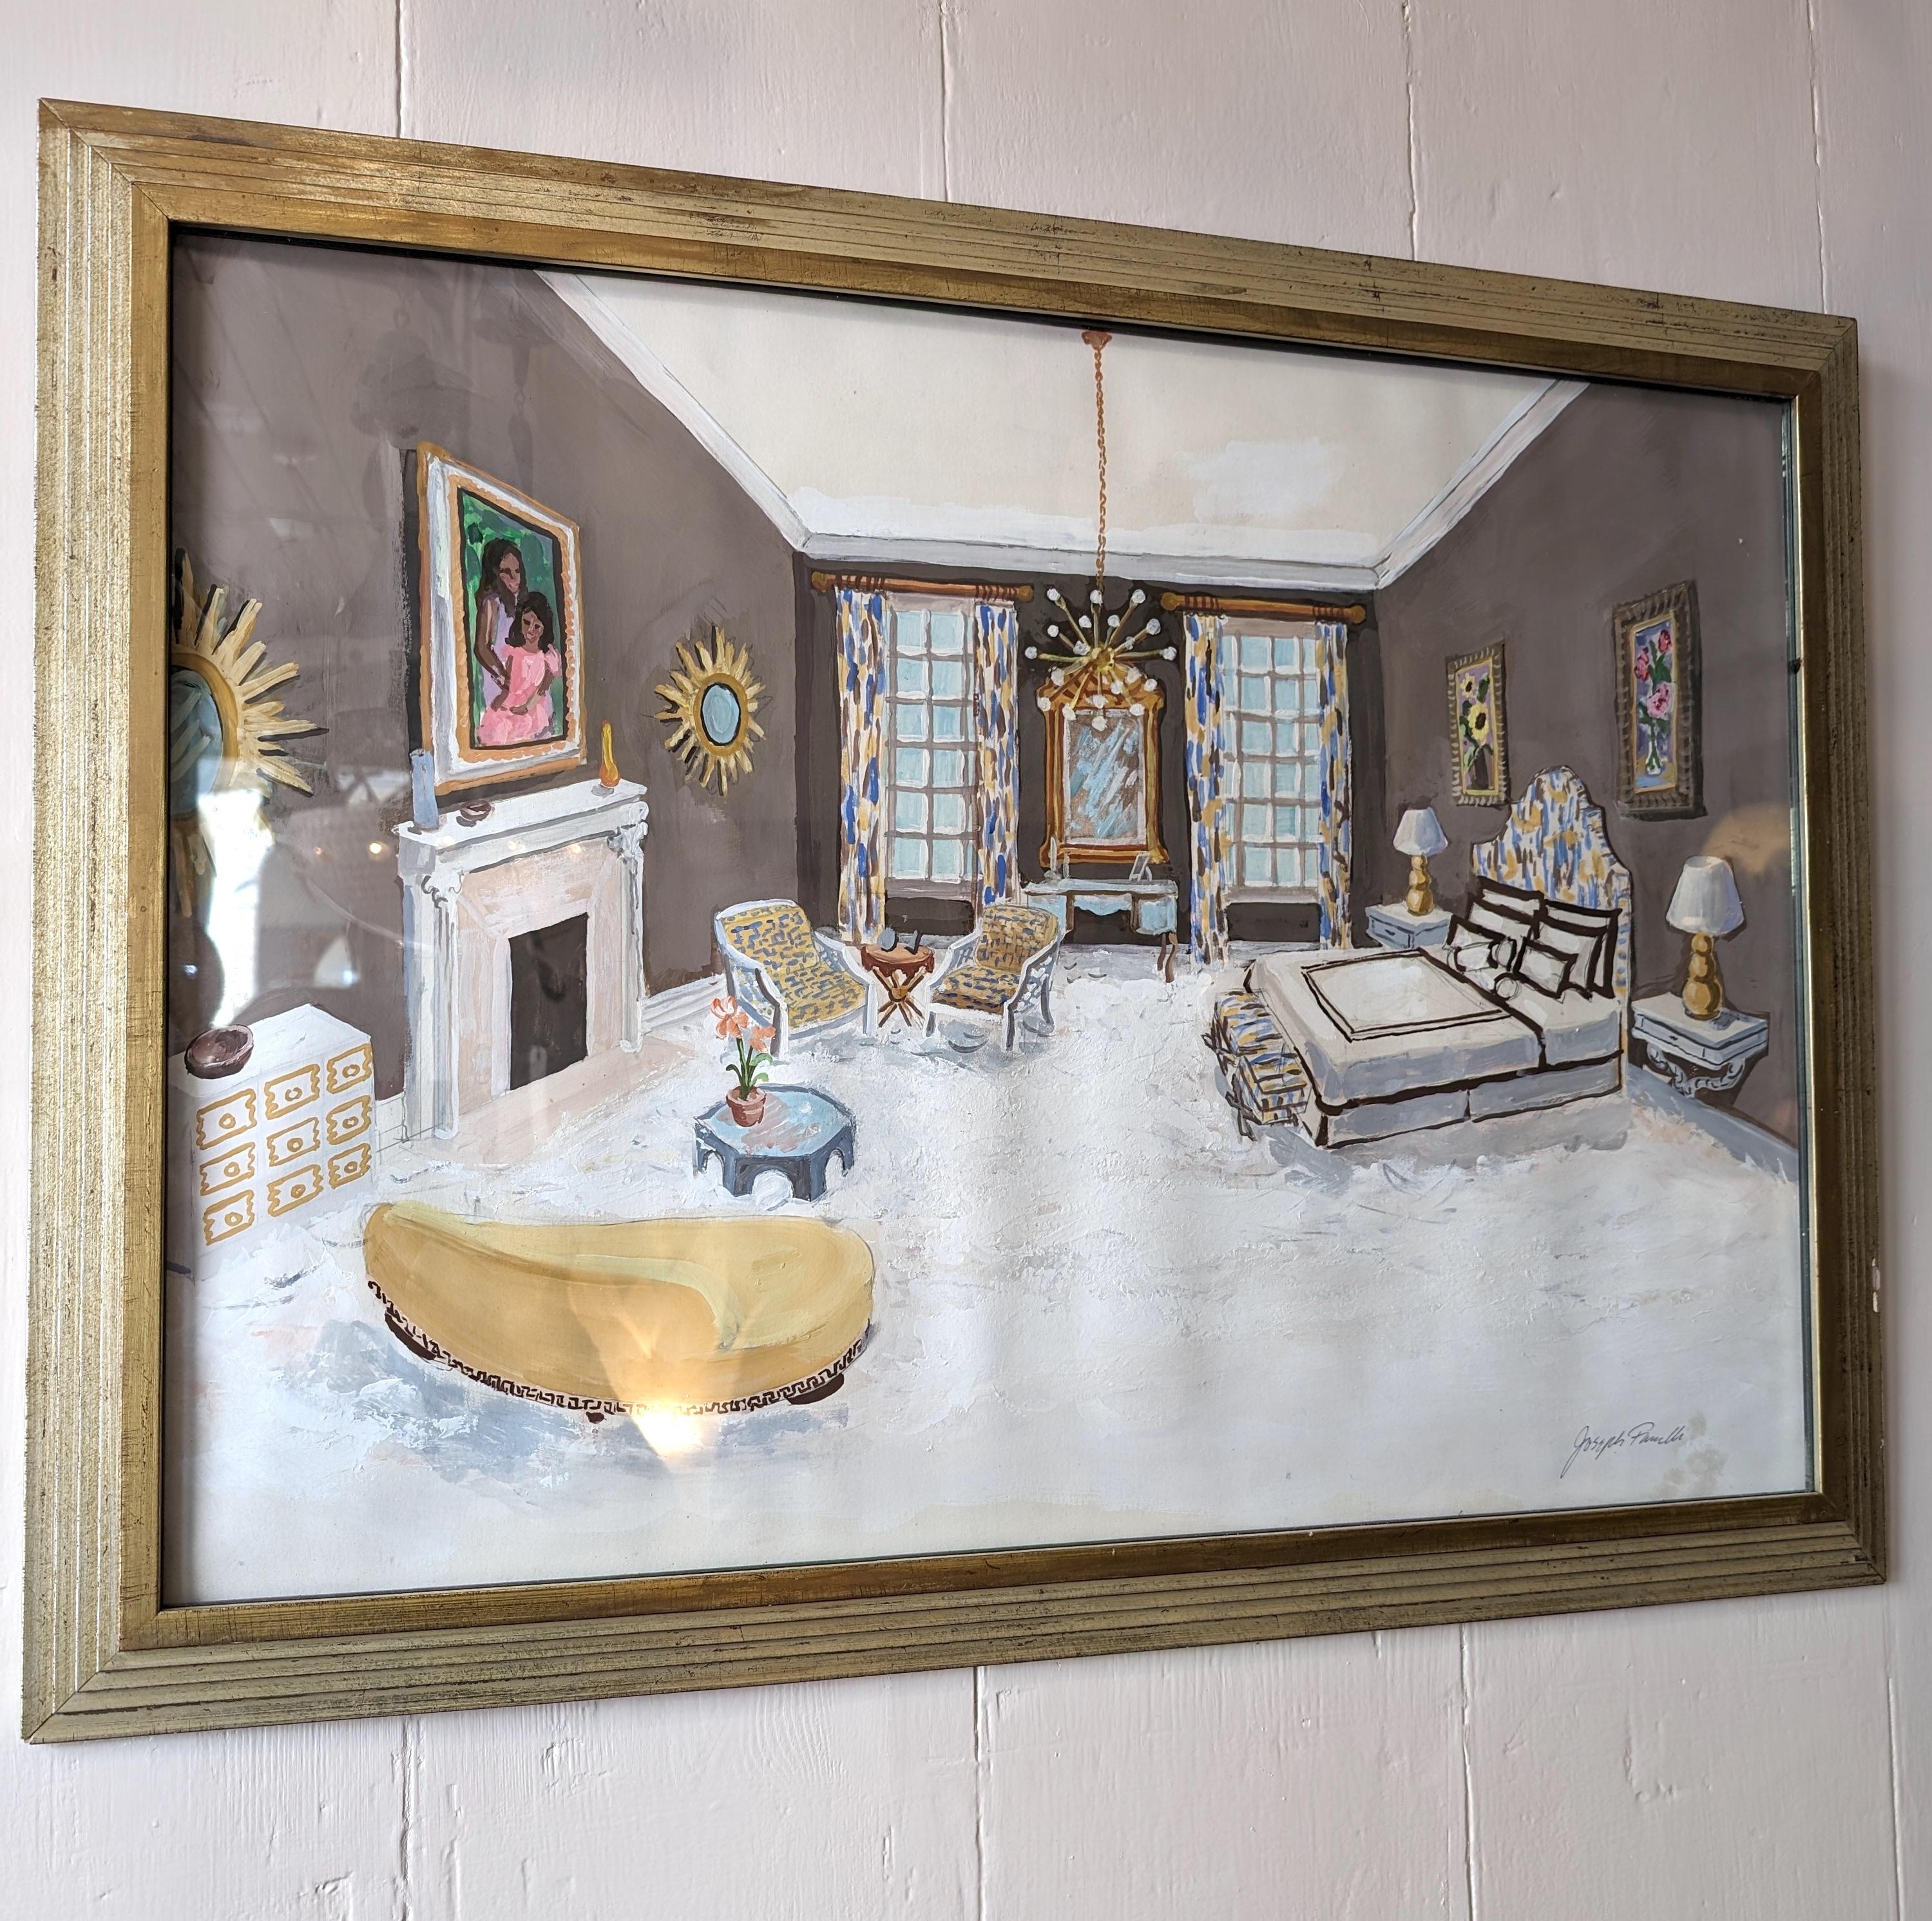 Midcentury American Dorothy Draper style Hollywood Regency interior painting In Good Condition For Sale In Hastings, GB